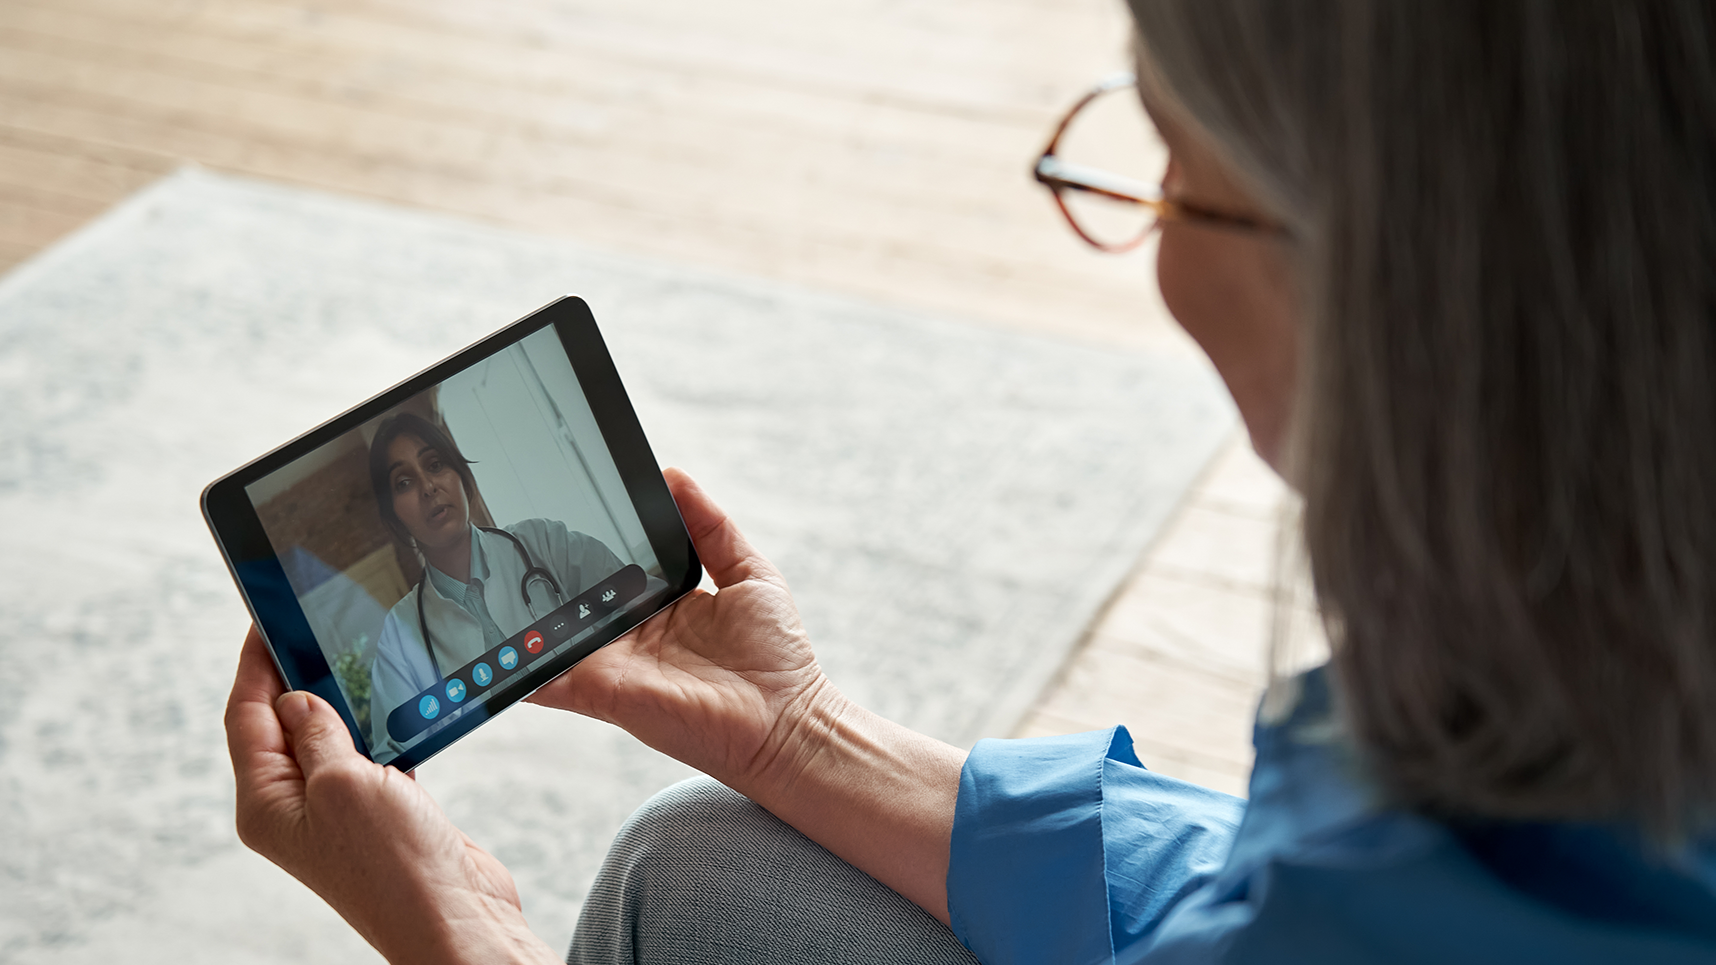 Two people talking via video chat on a handheld device.